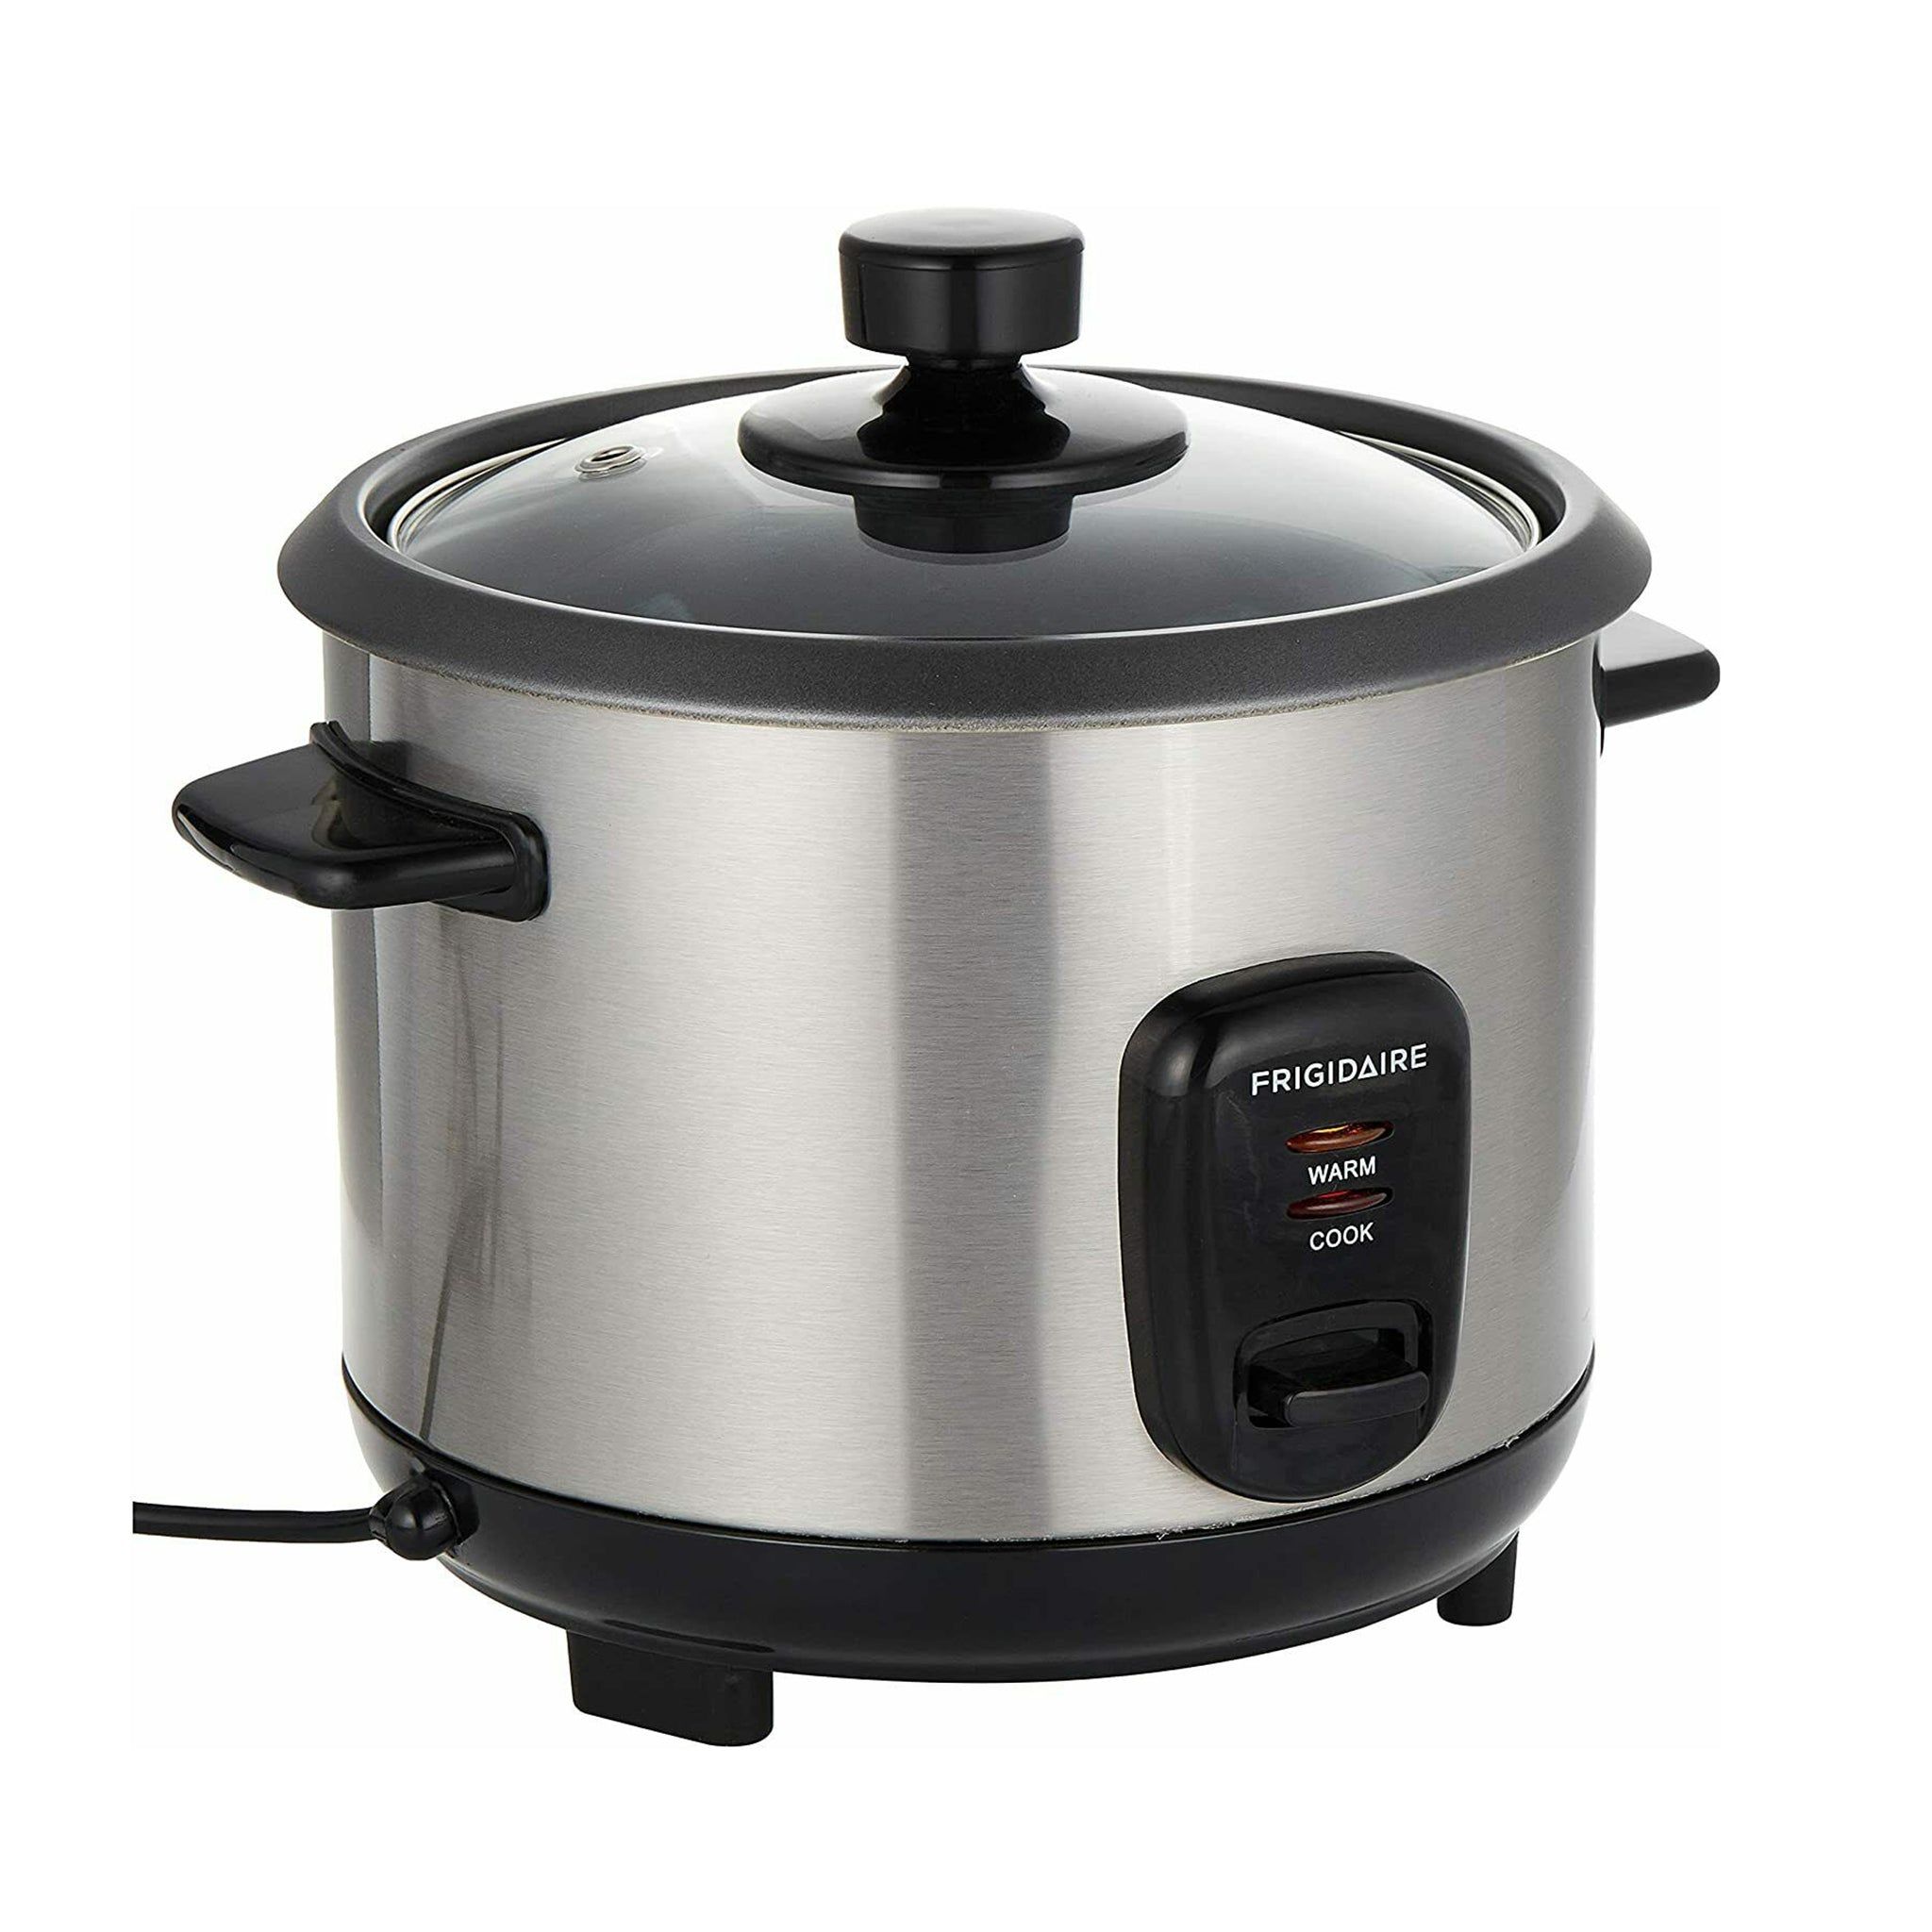 Best Stainless Steel Rice Cooker: My Top Picks for 2023 